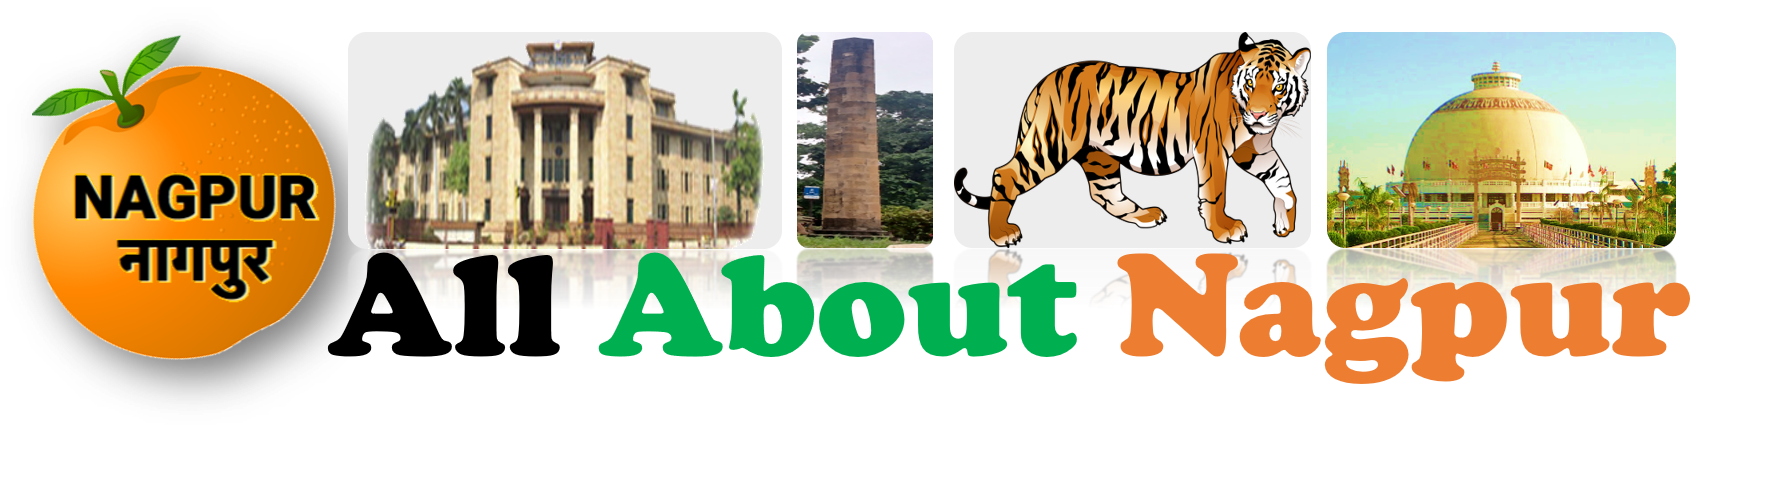 all about nagpur